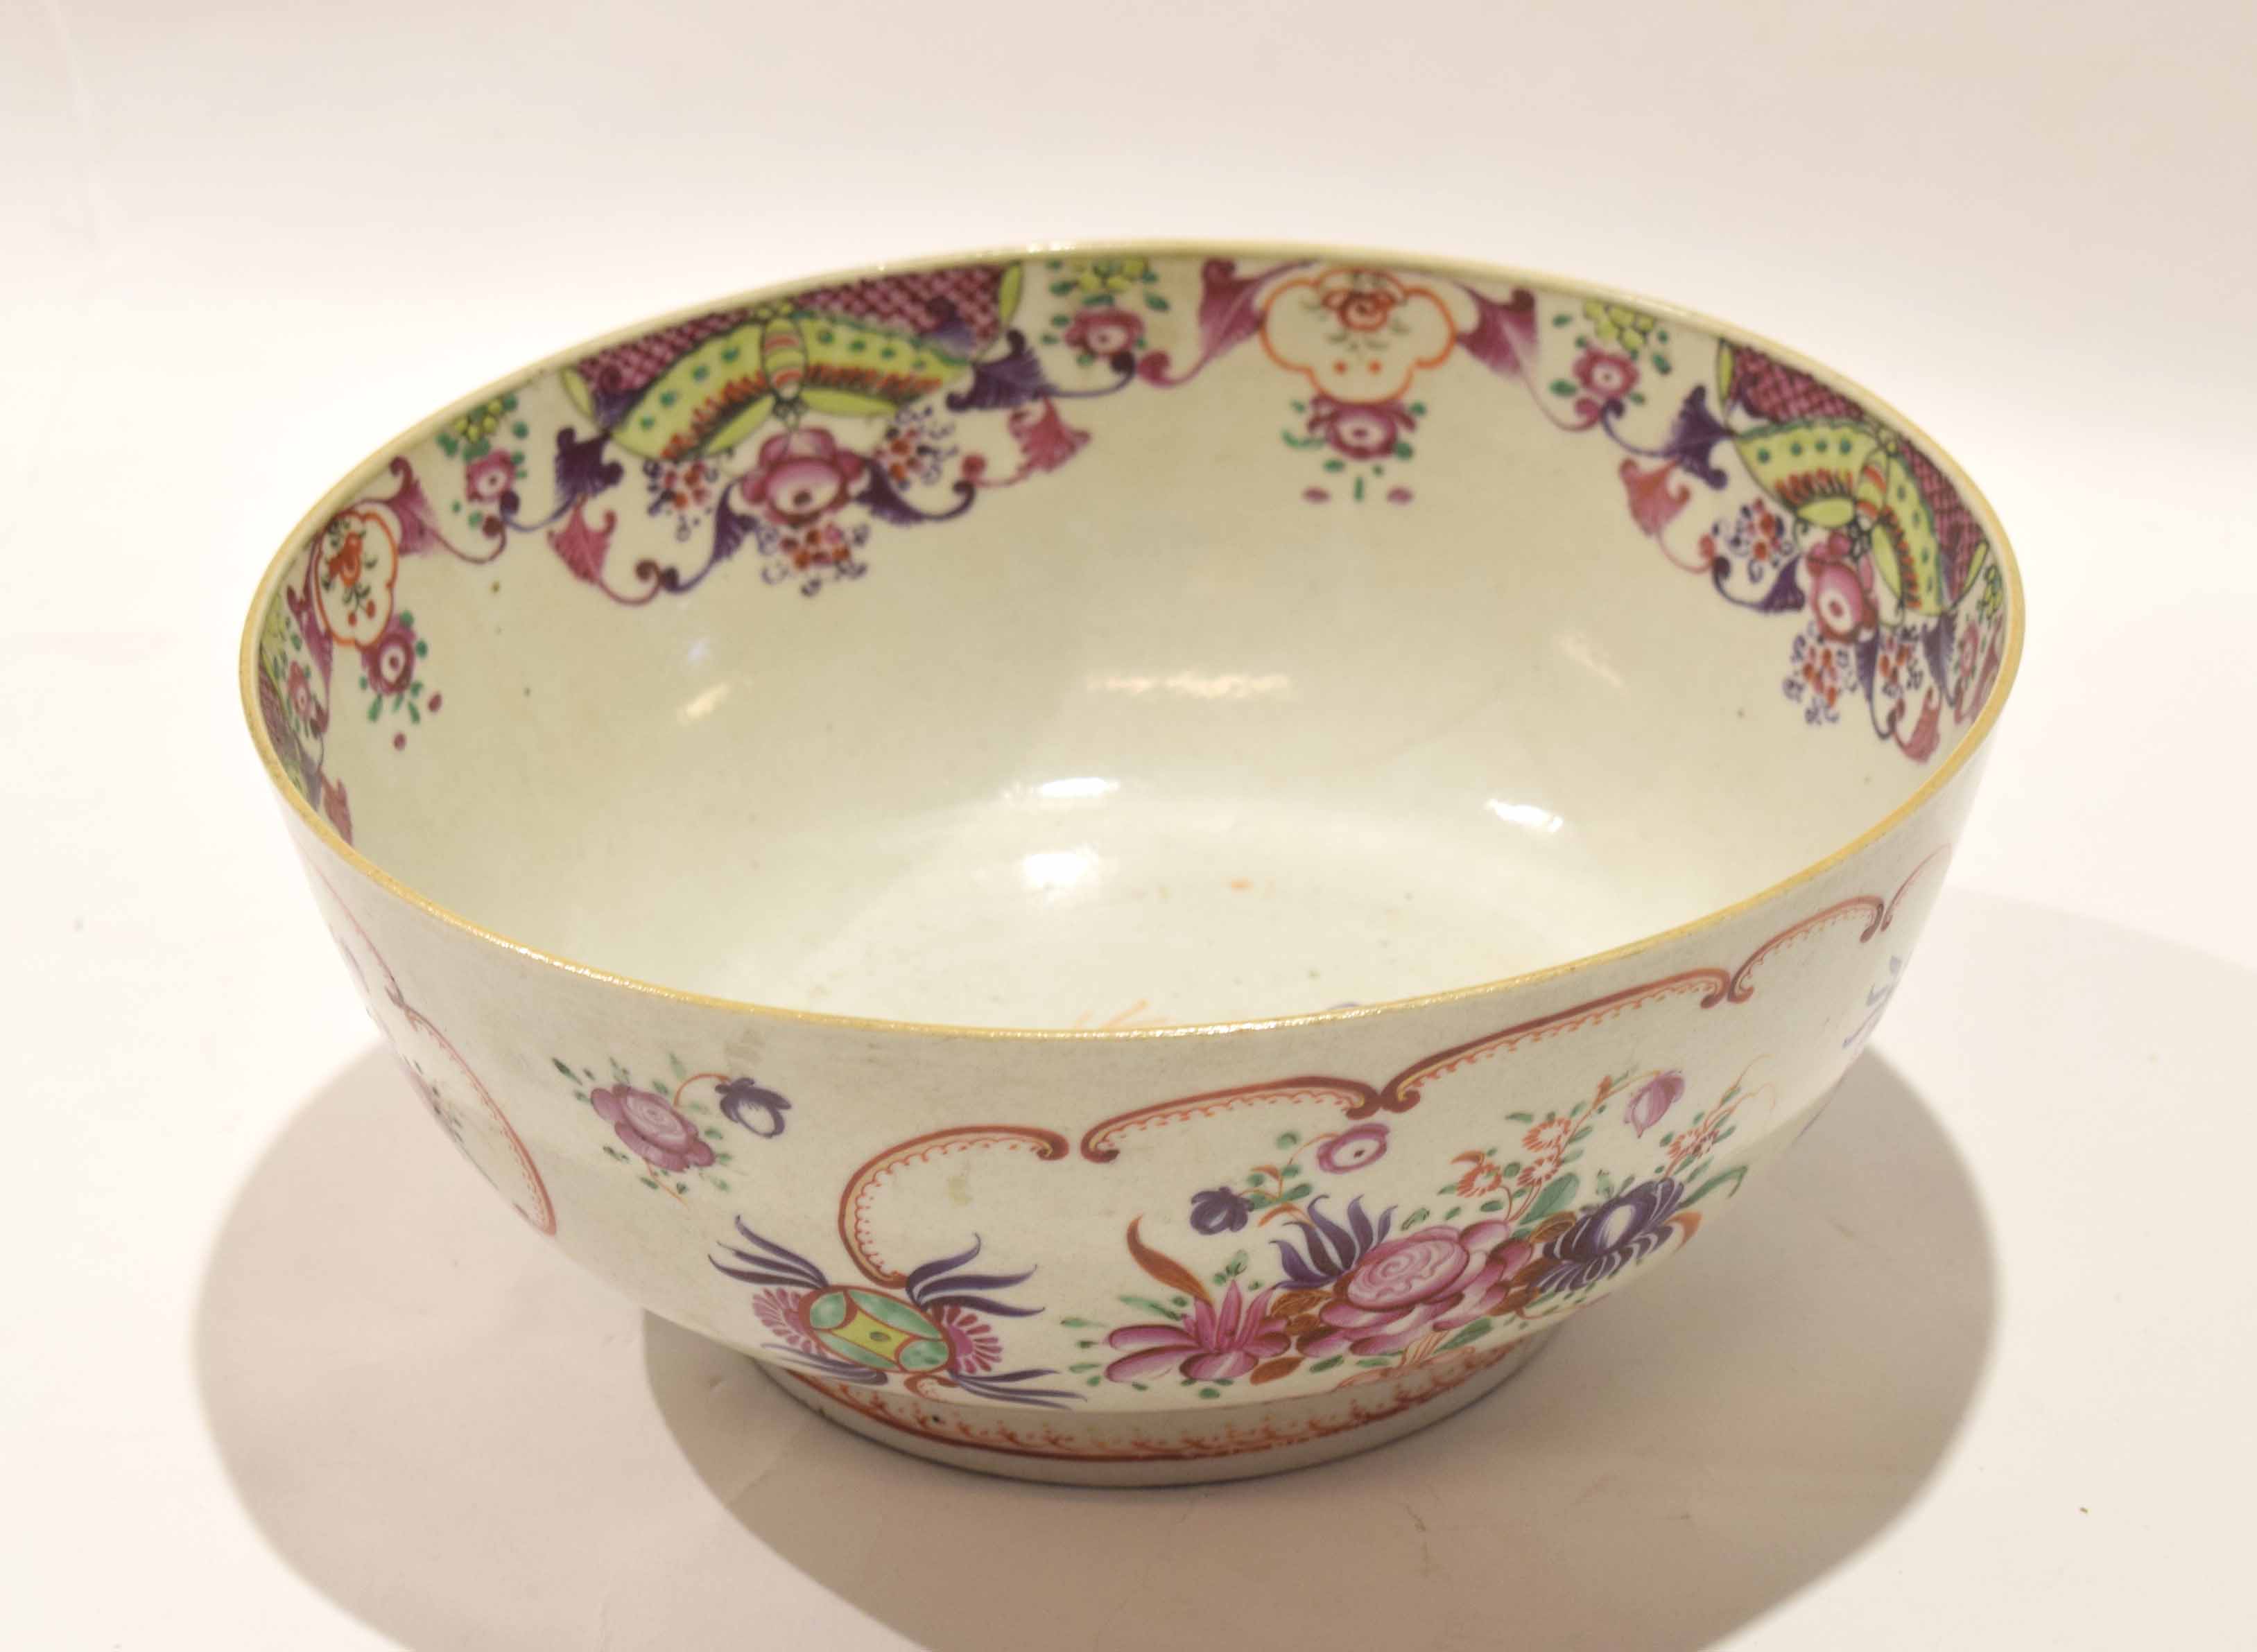 Late 18th century Chinese porcelain punch bowl, decorated in polychrome flowers to the exterior